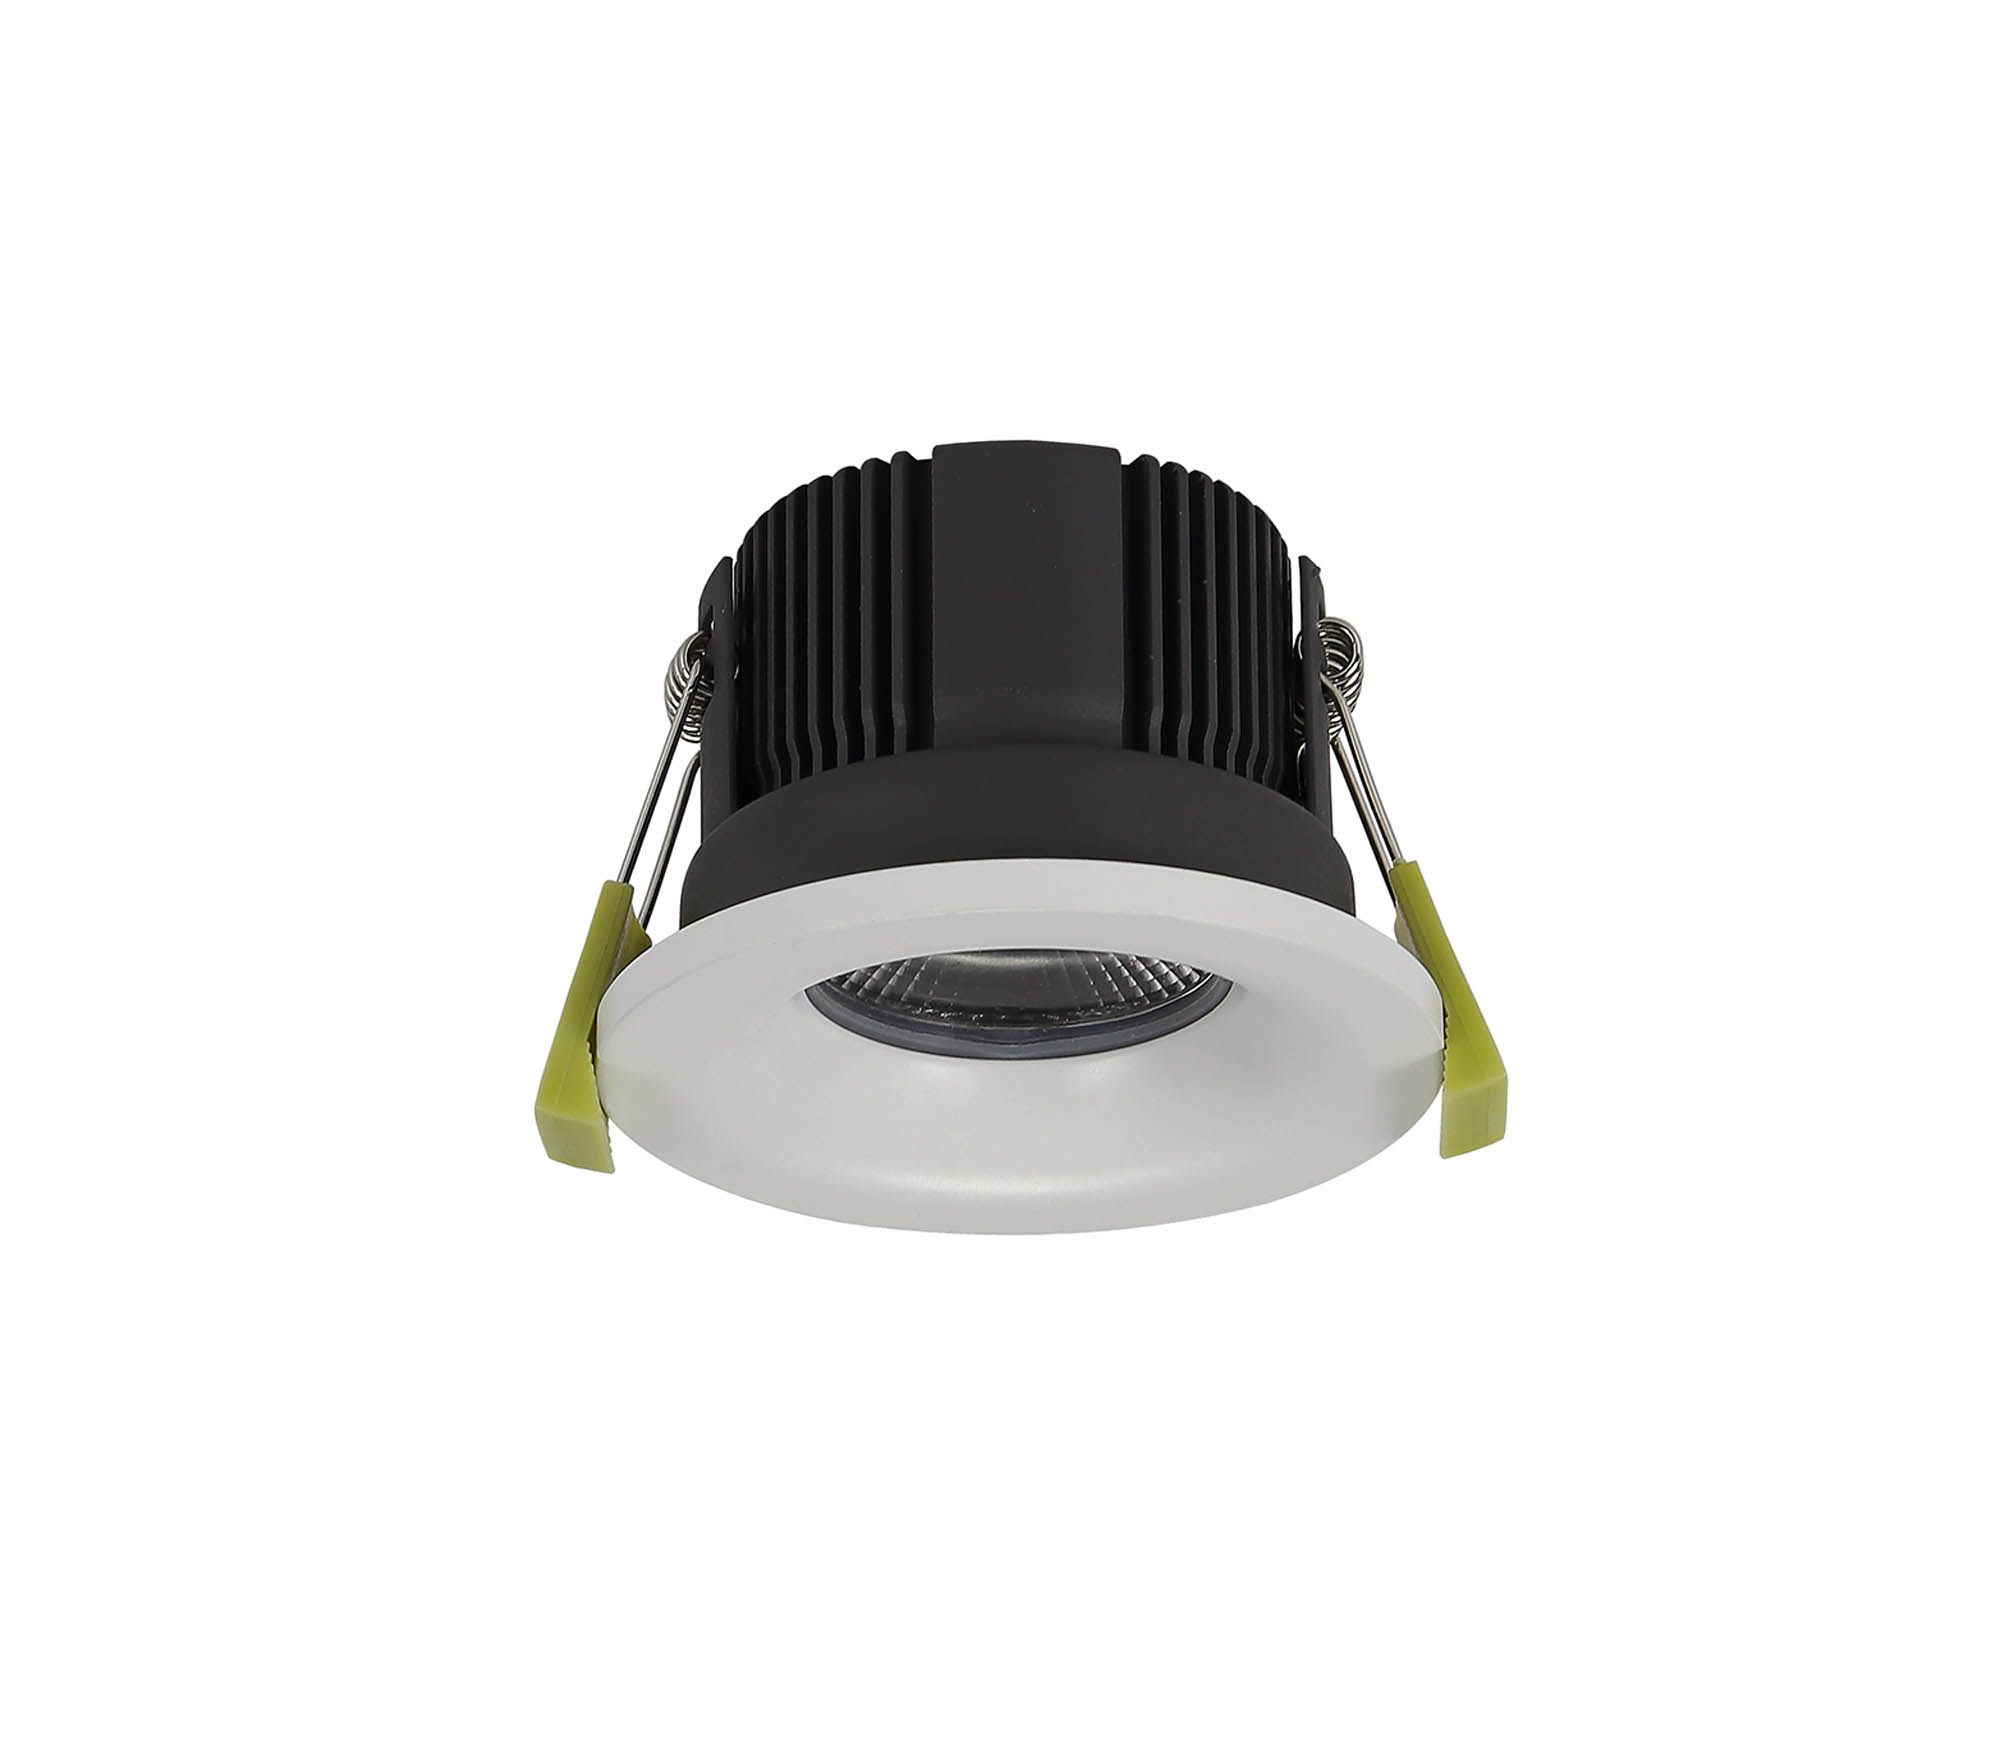 DM200690  Beck 11 FR; 11W; IP65 Matt White LED Recessed Curved Fire Rated Downlight; Cut Out 68mm; 5000K; PLUG IN DRIVER INCLUDED; 3yrs Warranty